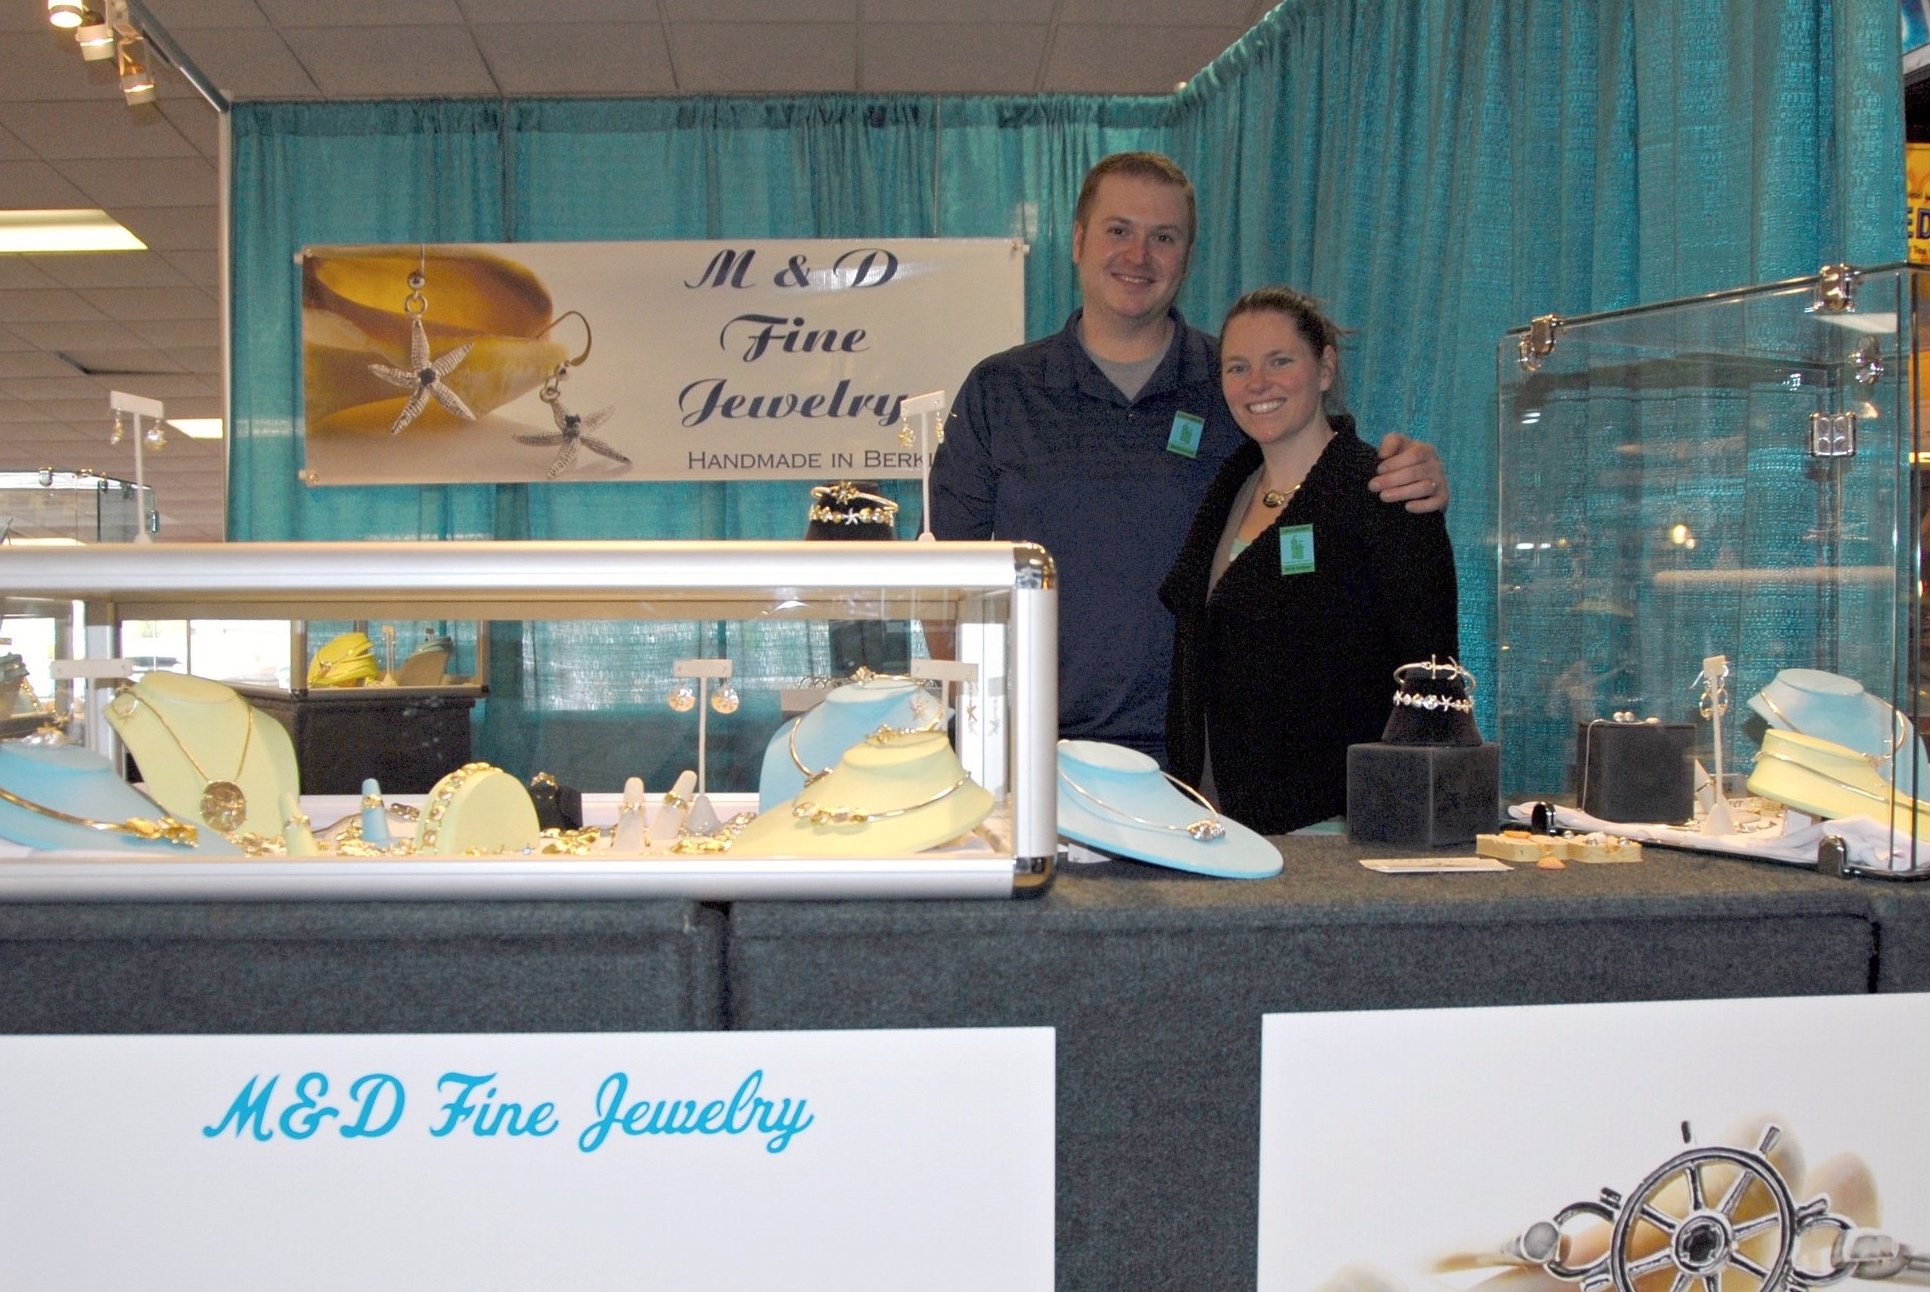 White male and female standing in jewelry booth